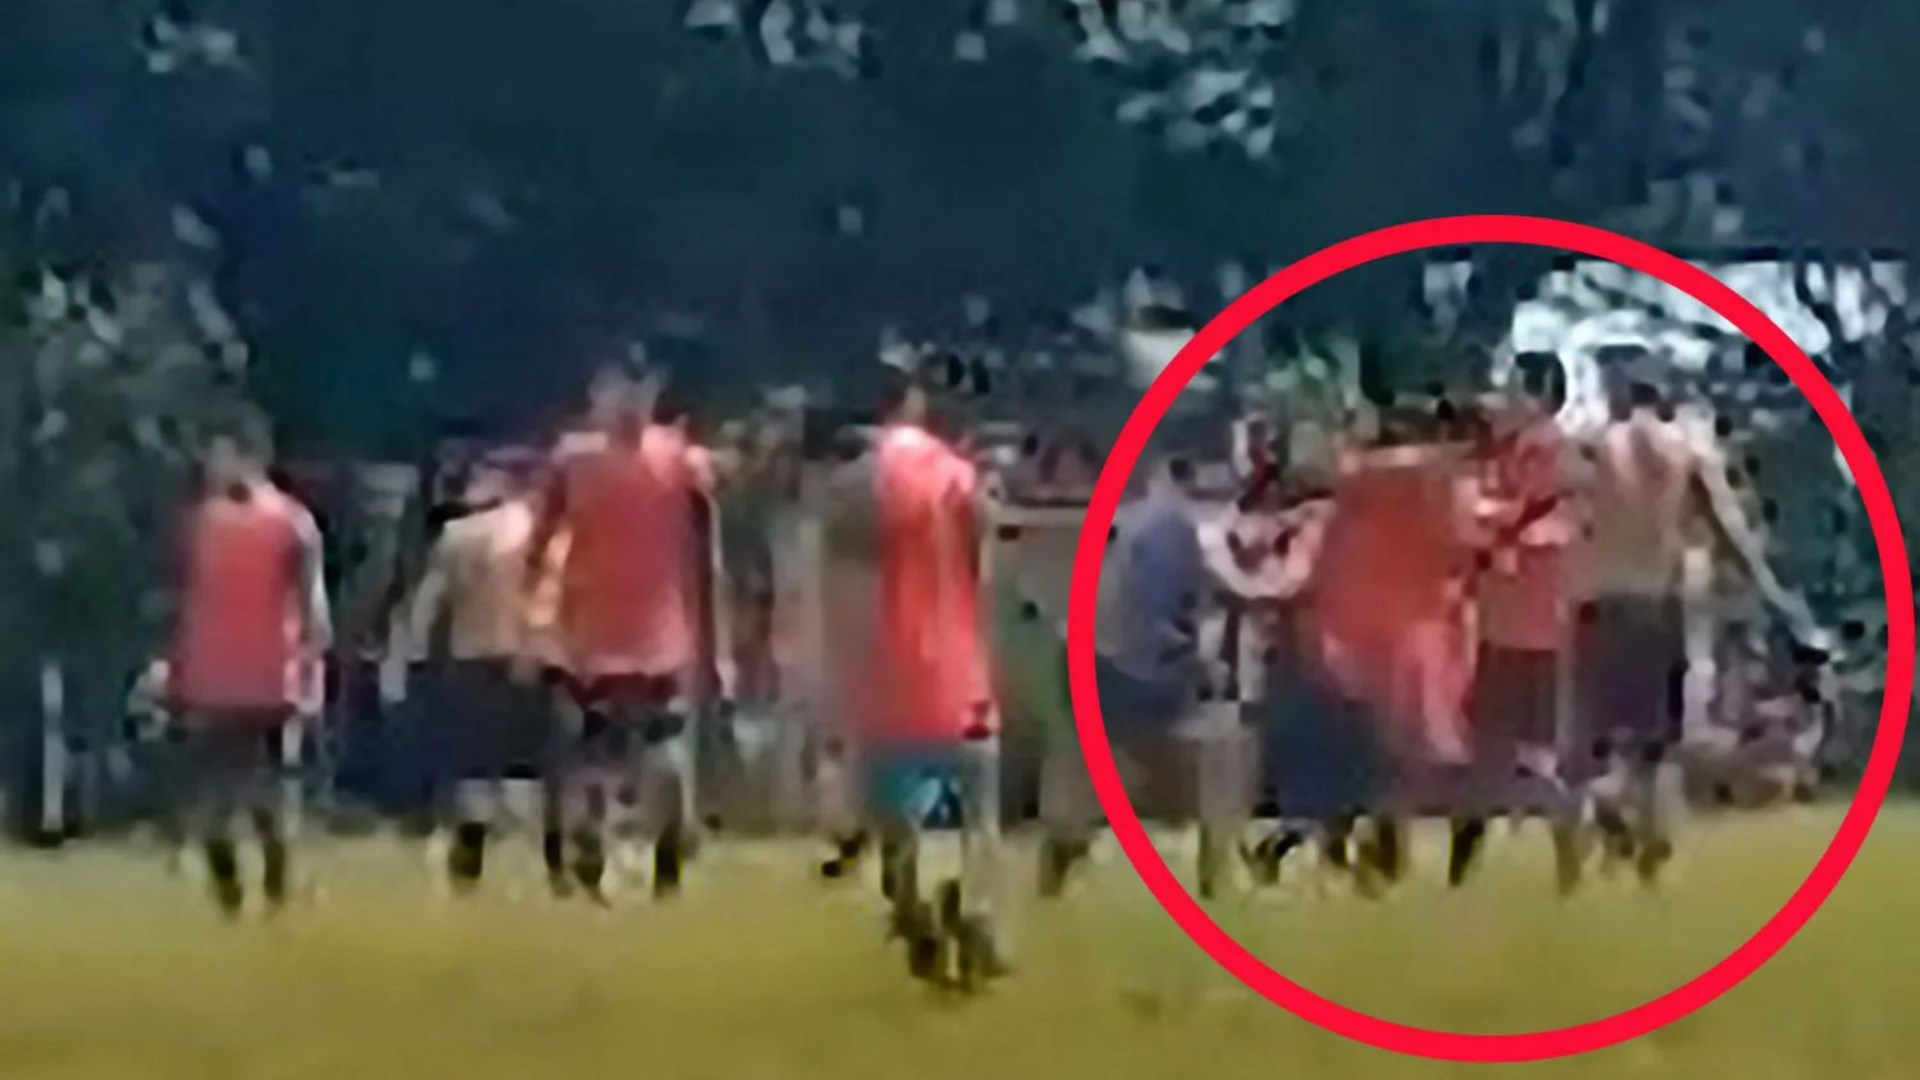 Shocking moment referee stabs footballer in huge brawl before player is rushed to hospital with punctured lung